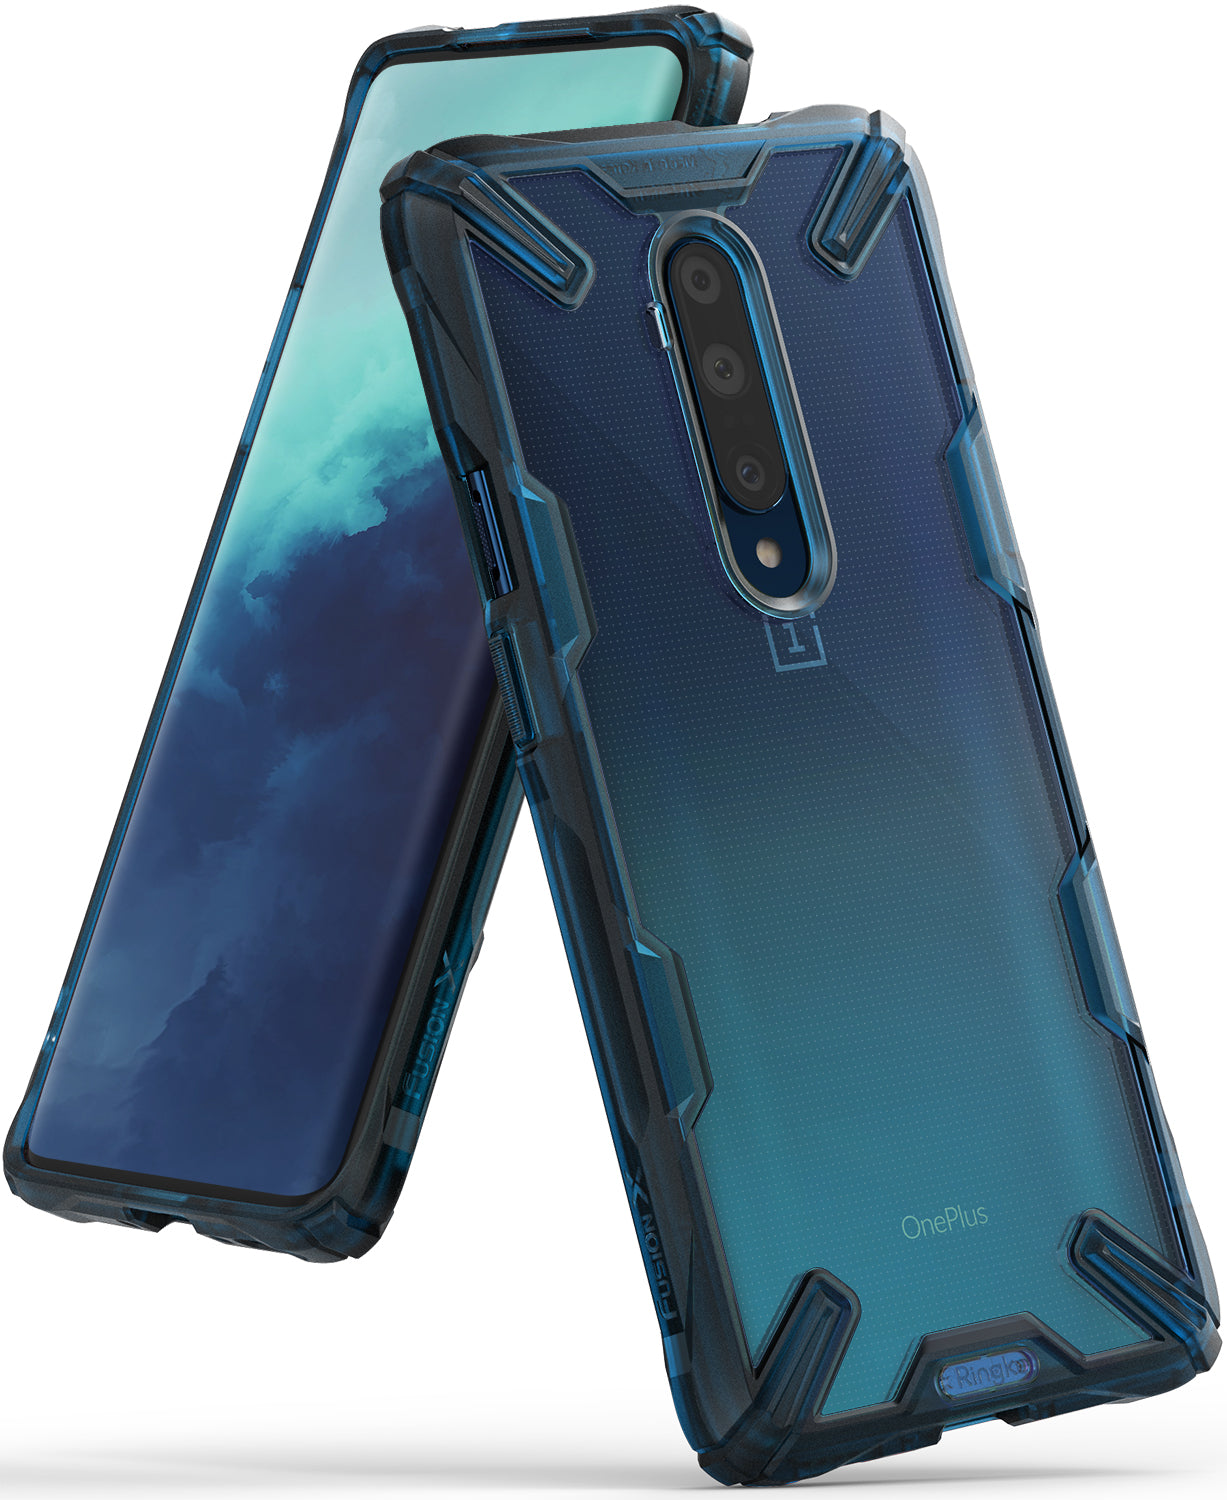 OnePlus 7T Pro Case | Ringke Fusion-X – Ringke Official Store